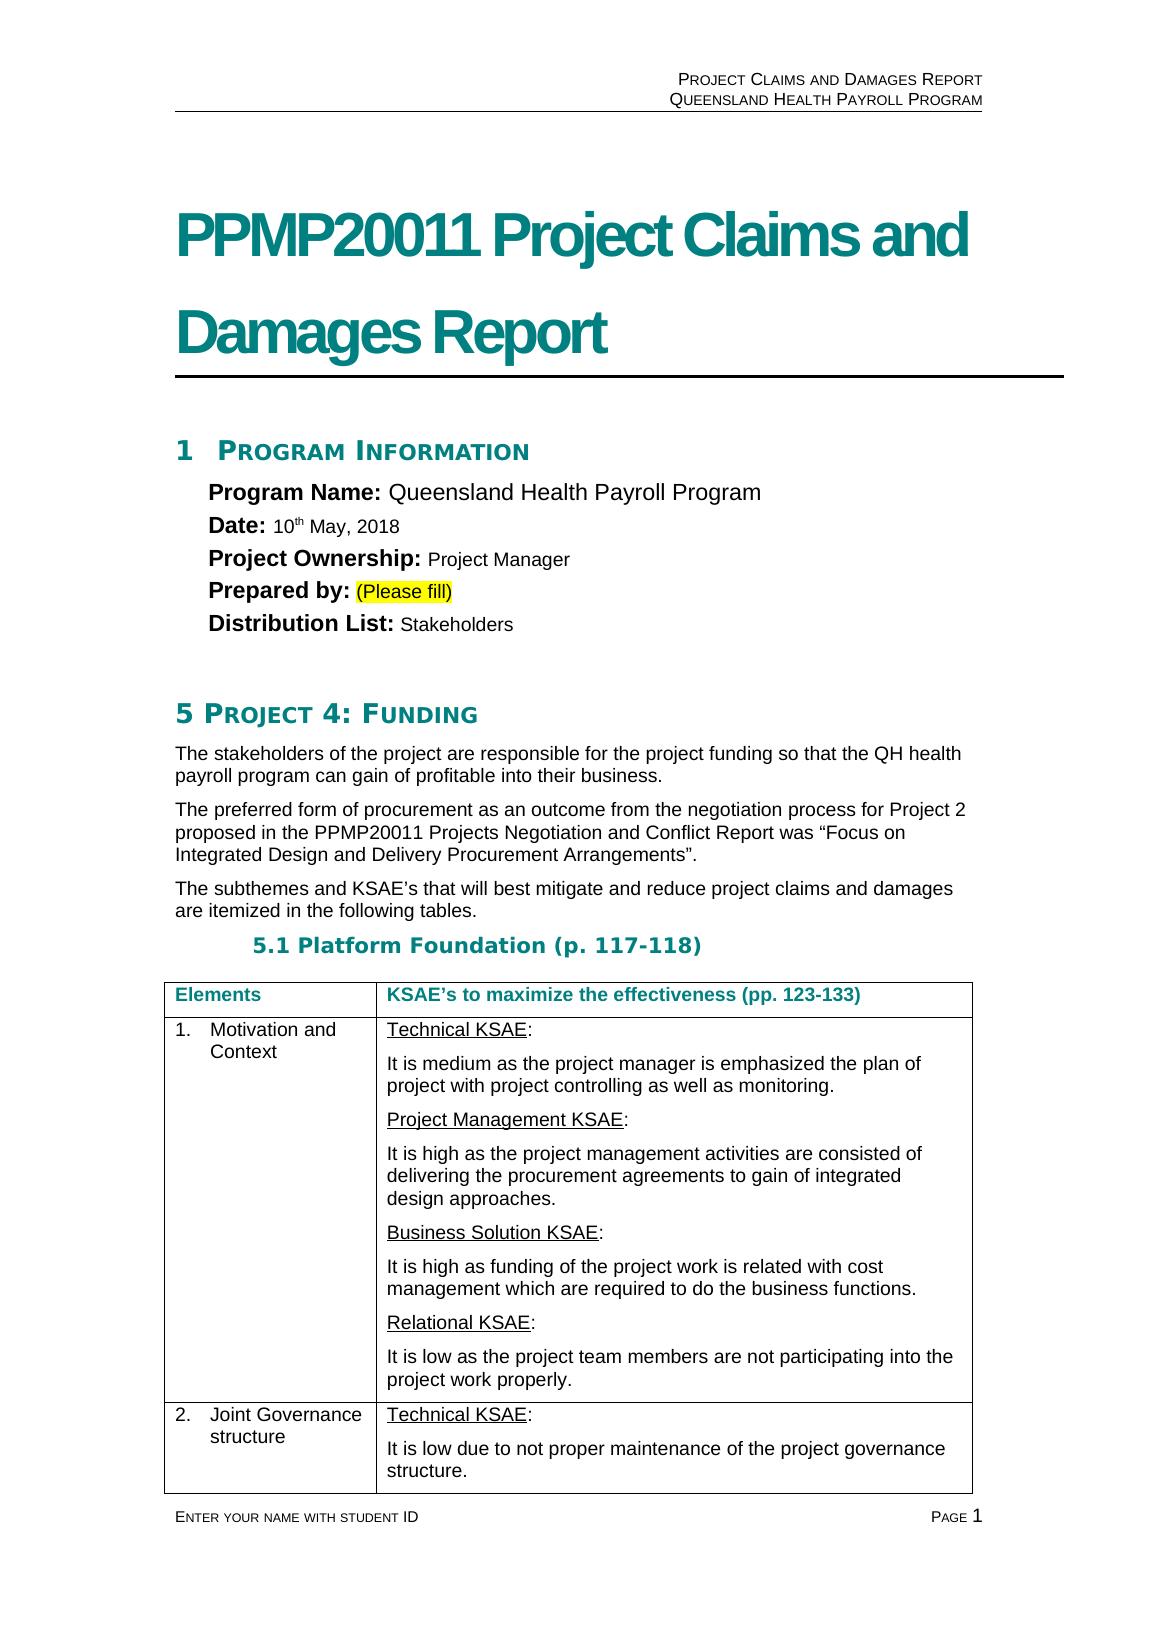 PPMP20011: Project Claims and Damages Report_1